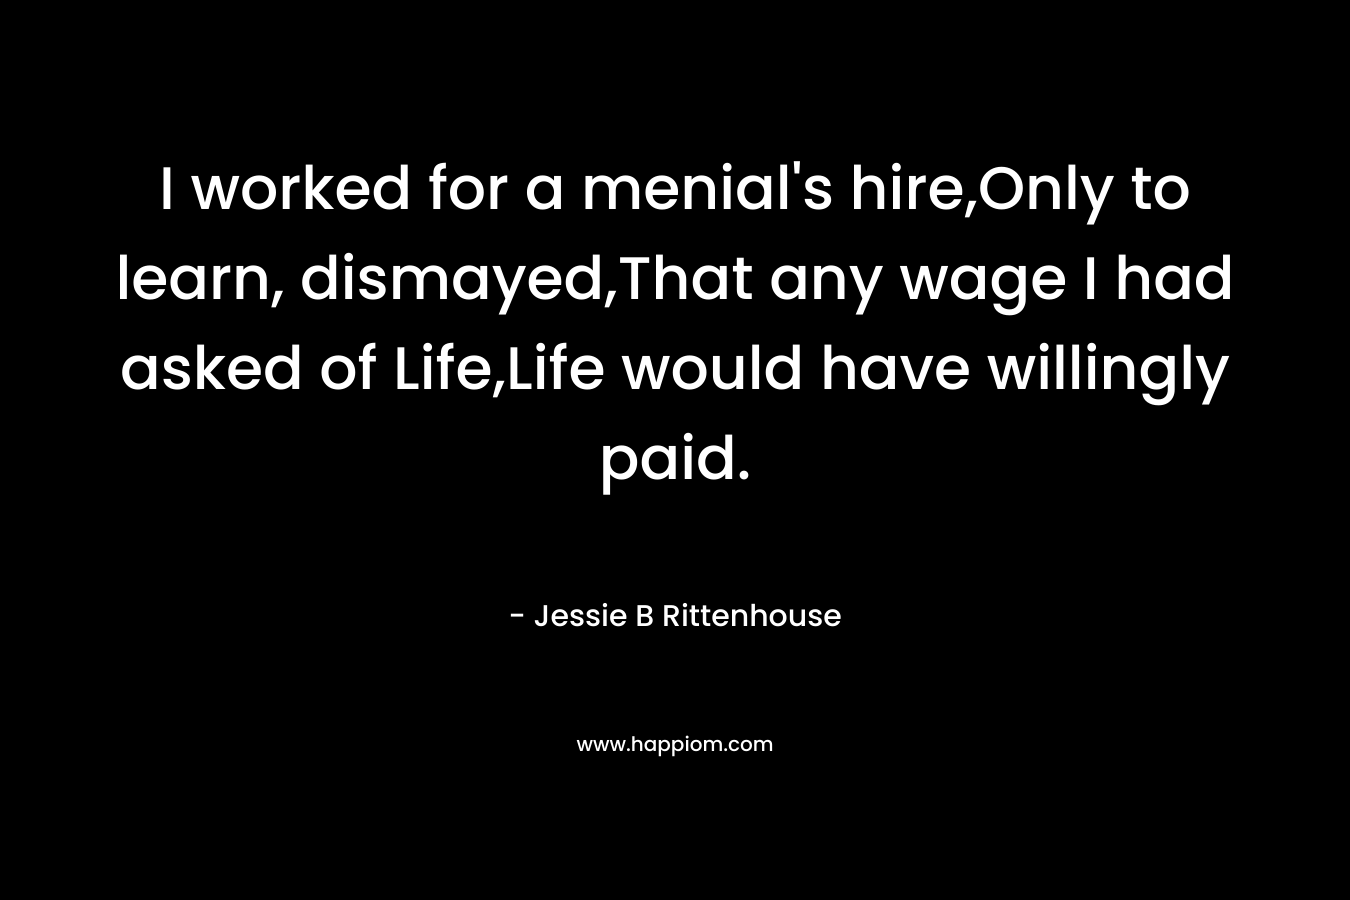 I worked for a menial’s hire,Only to learn, dismayed,That any wage I had asked of Life,Life would have willingly paid. – Jessie B Rittenhouse